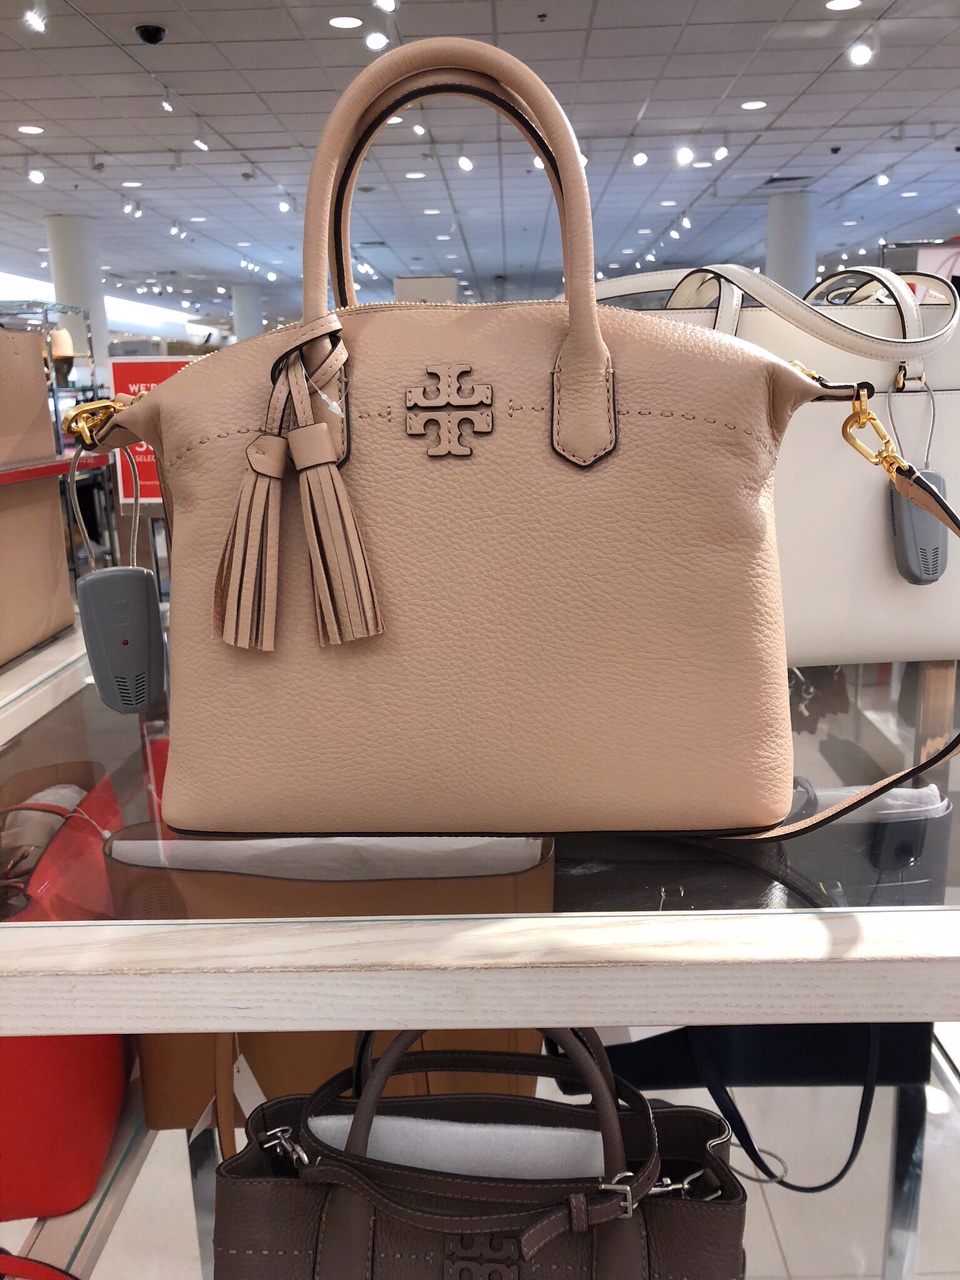 Tory Burch 25% Off Promo April 2018 | The Double Take Girls Style Blog